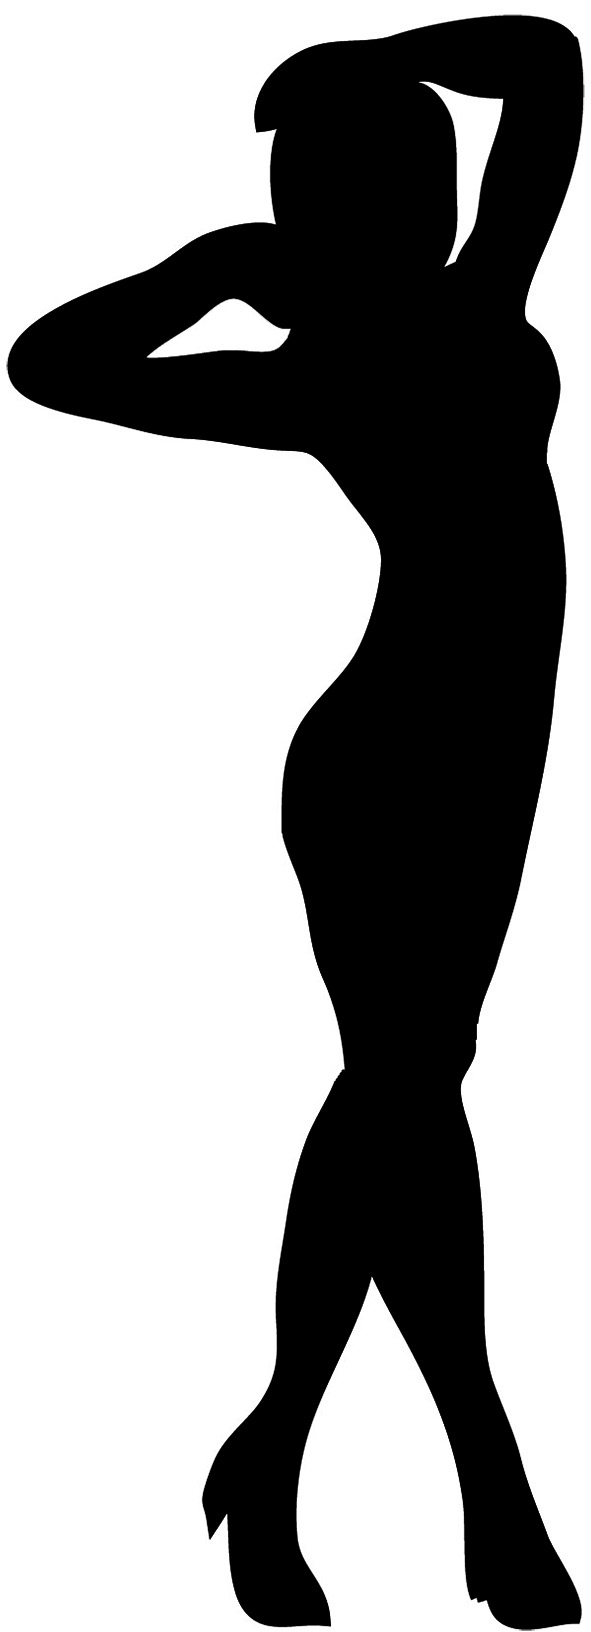 Business Woman Silhouette Cli